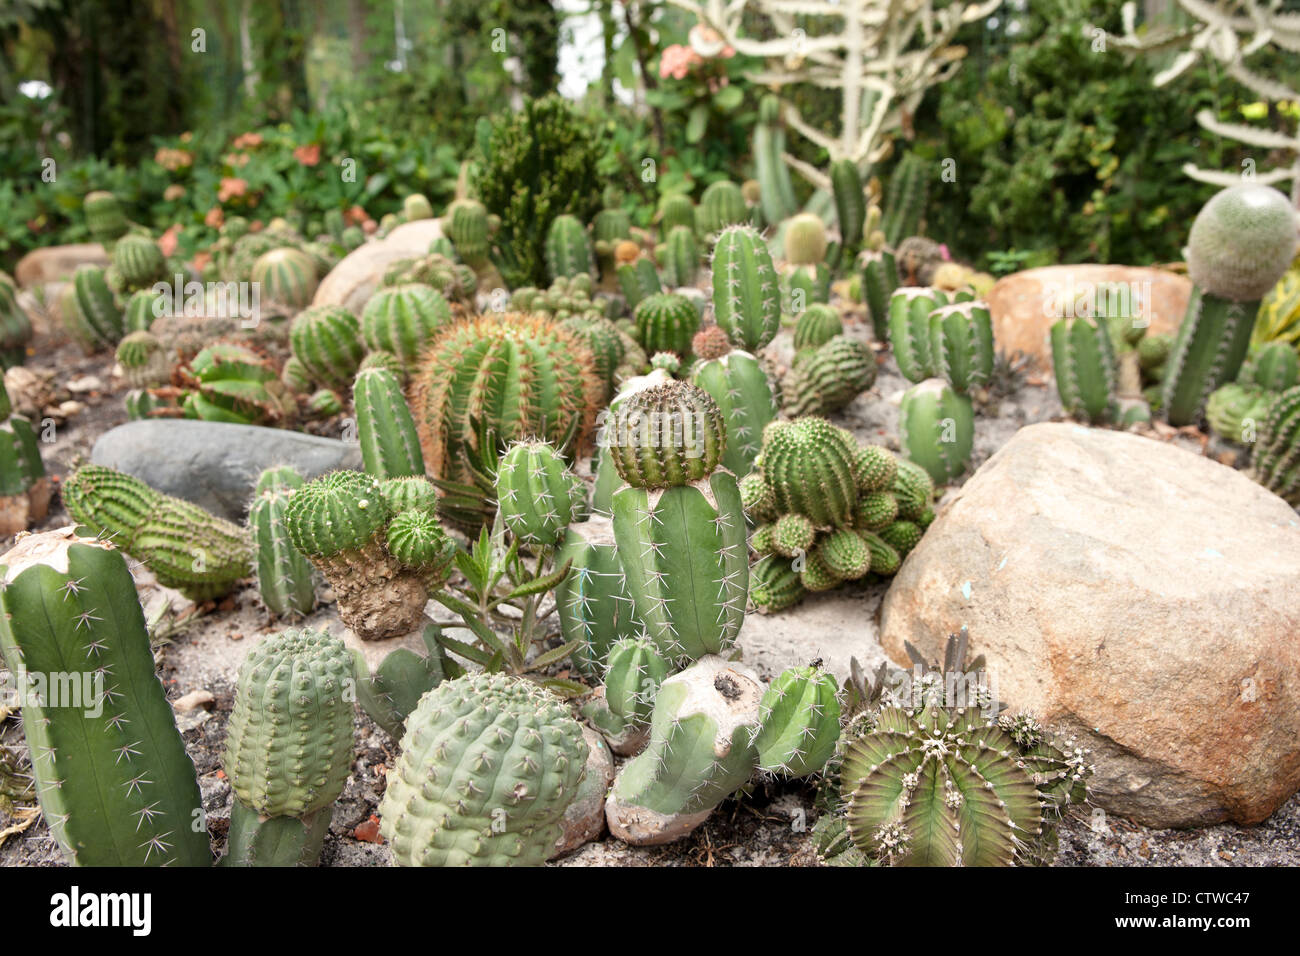 great image of some prickly cacti cactus plants Stock Photo